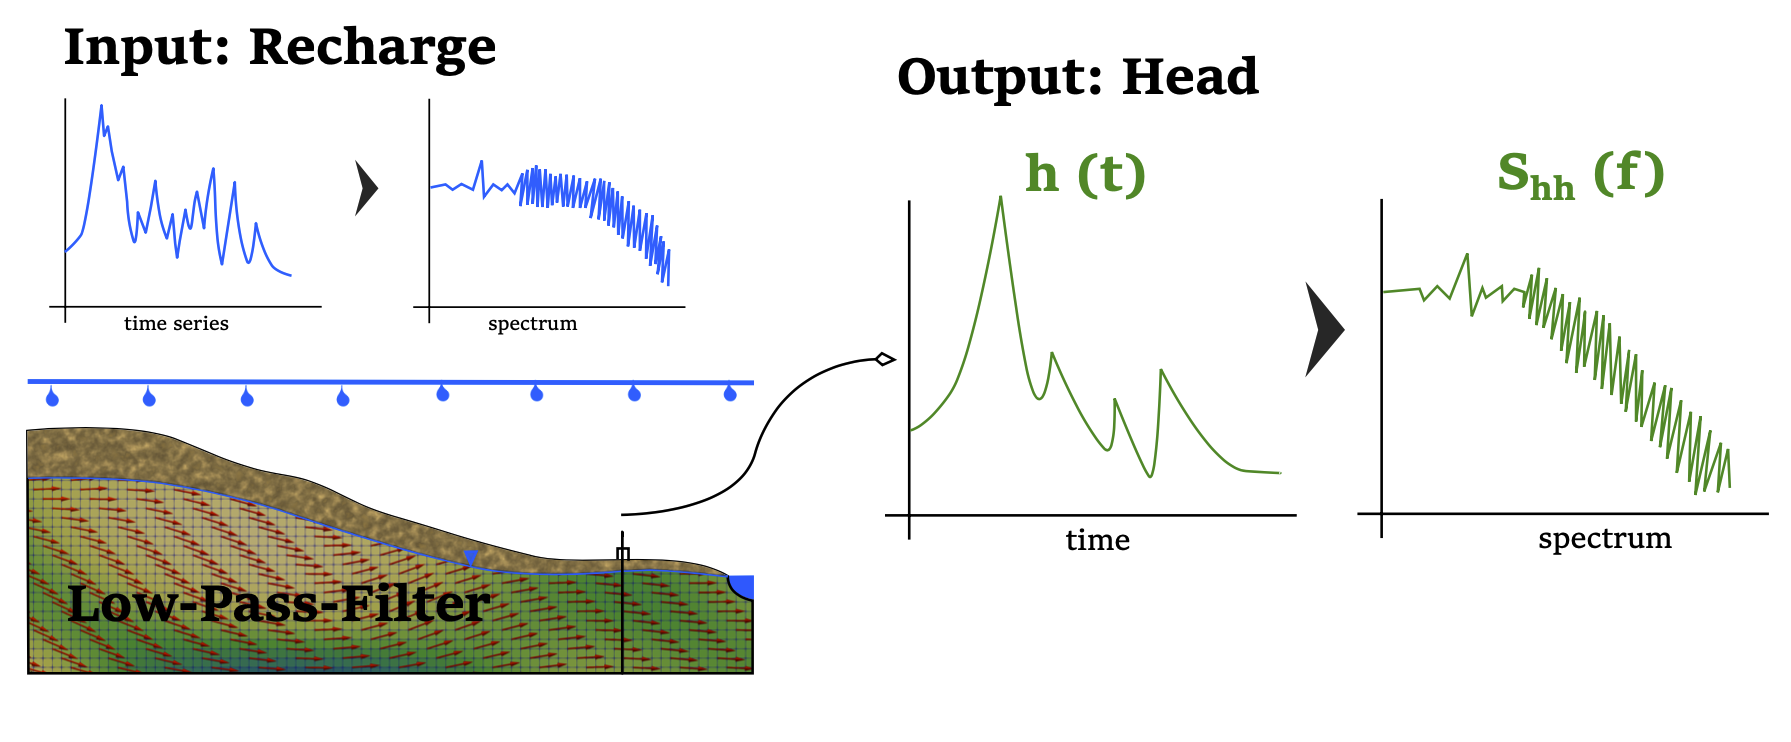 The aquifer serves as a low-pass filter: high frequency components in the input signal (recharge) are attenuated in the output signal (gw level).